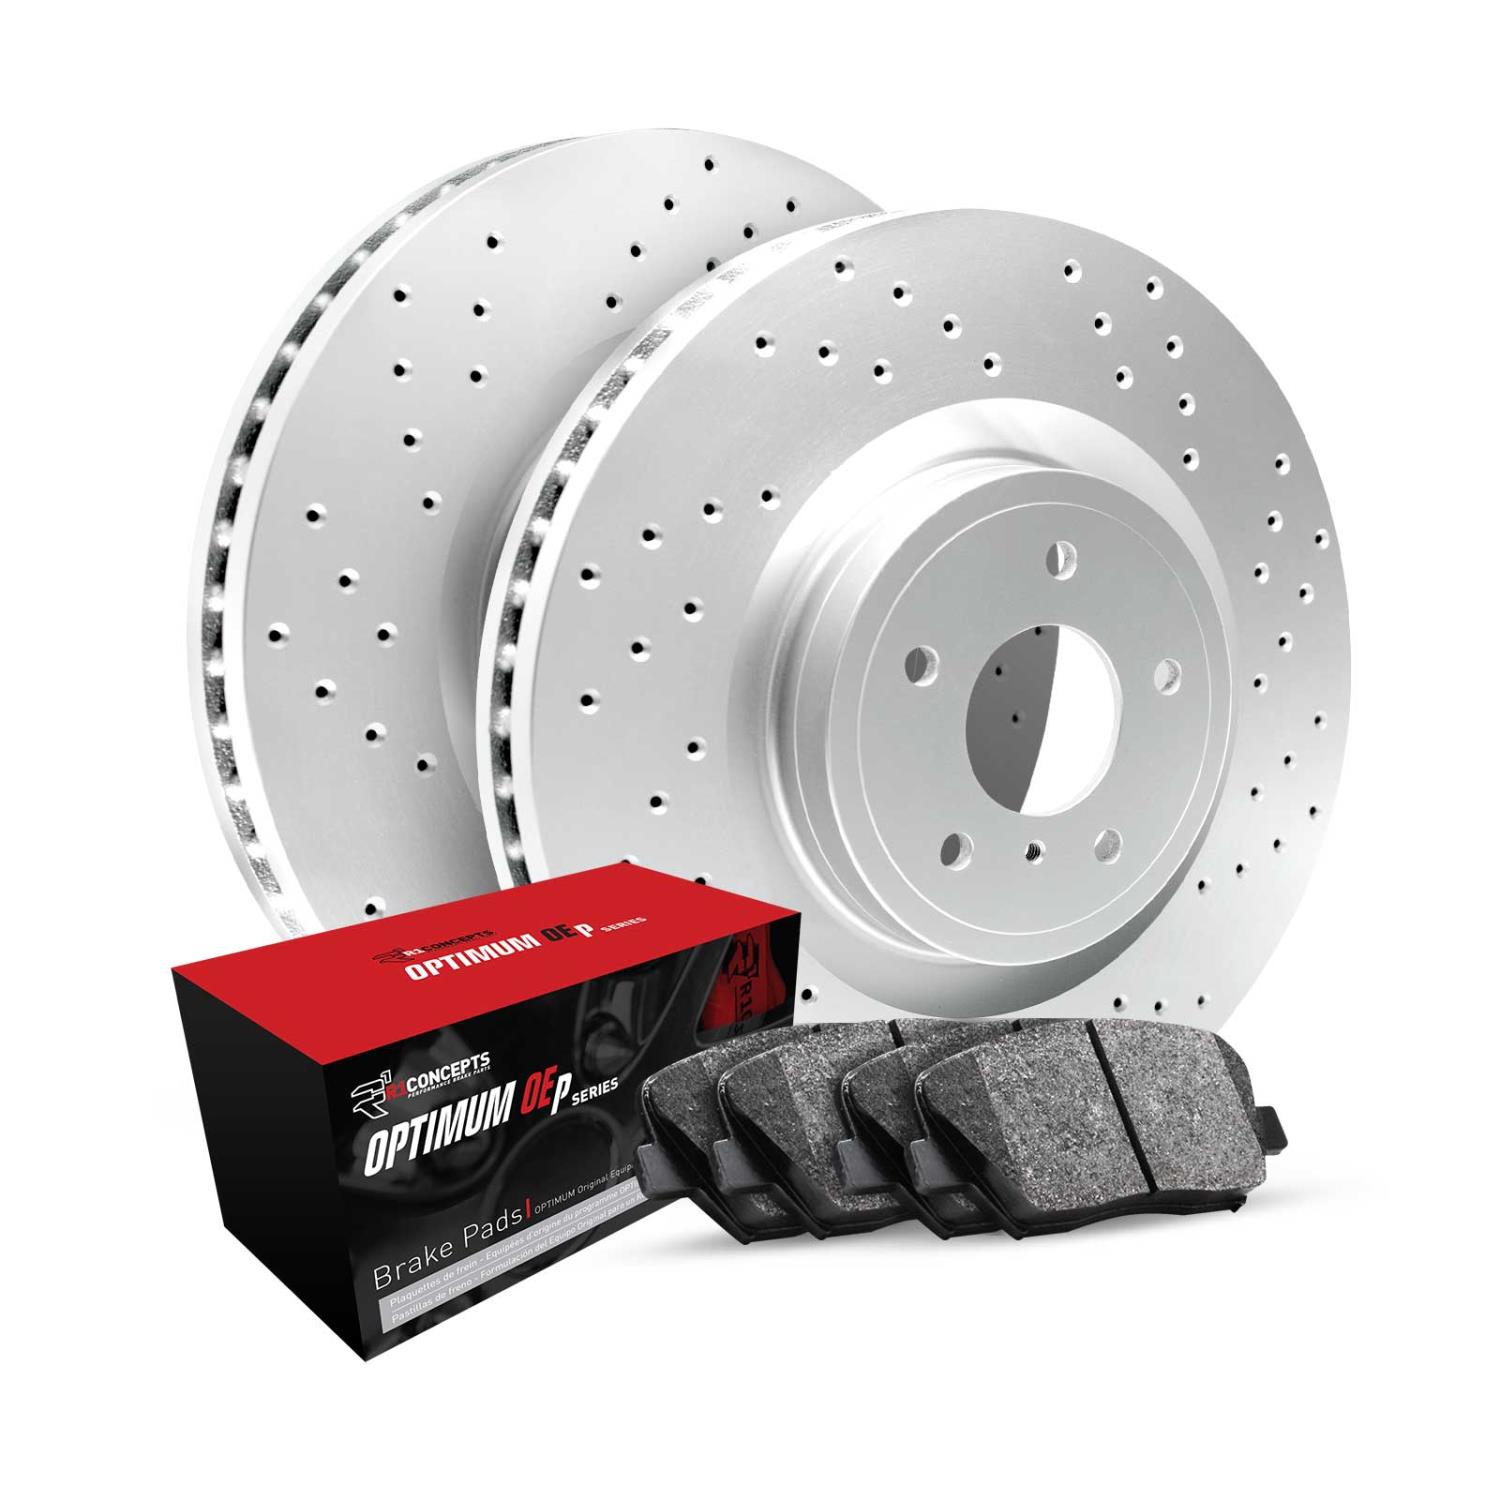 GEO-Carbon Drilled Brake Rotor Set w/Optimum OE Pads, 2000-2008 Fits Multiple Makes/Models, Position: Rear